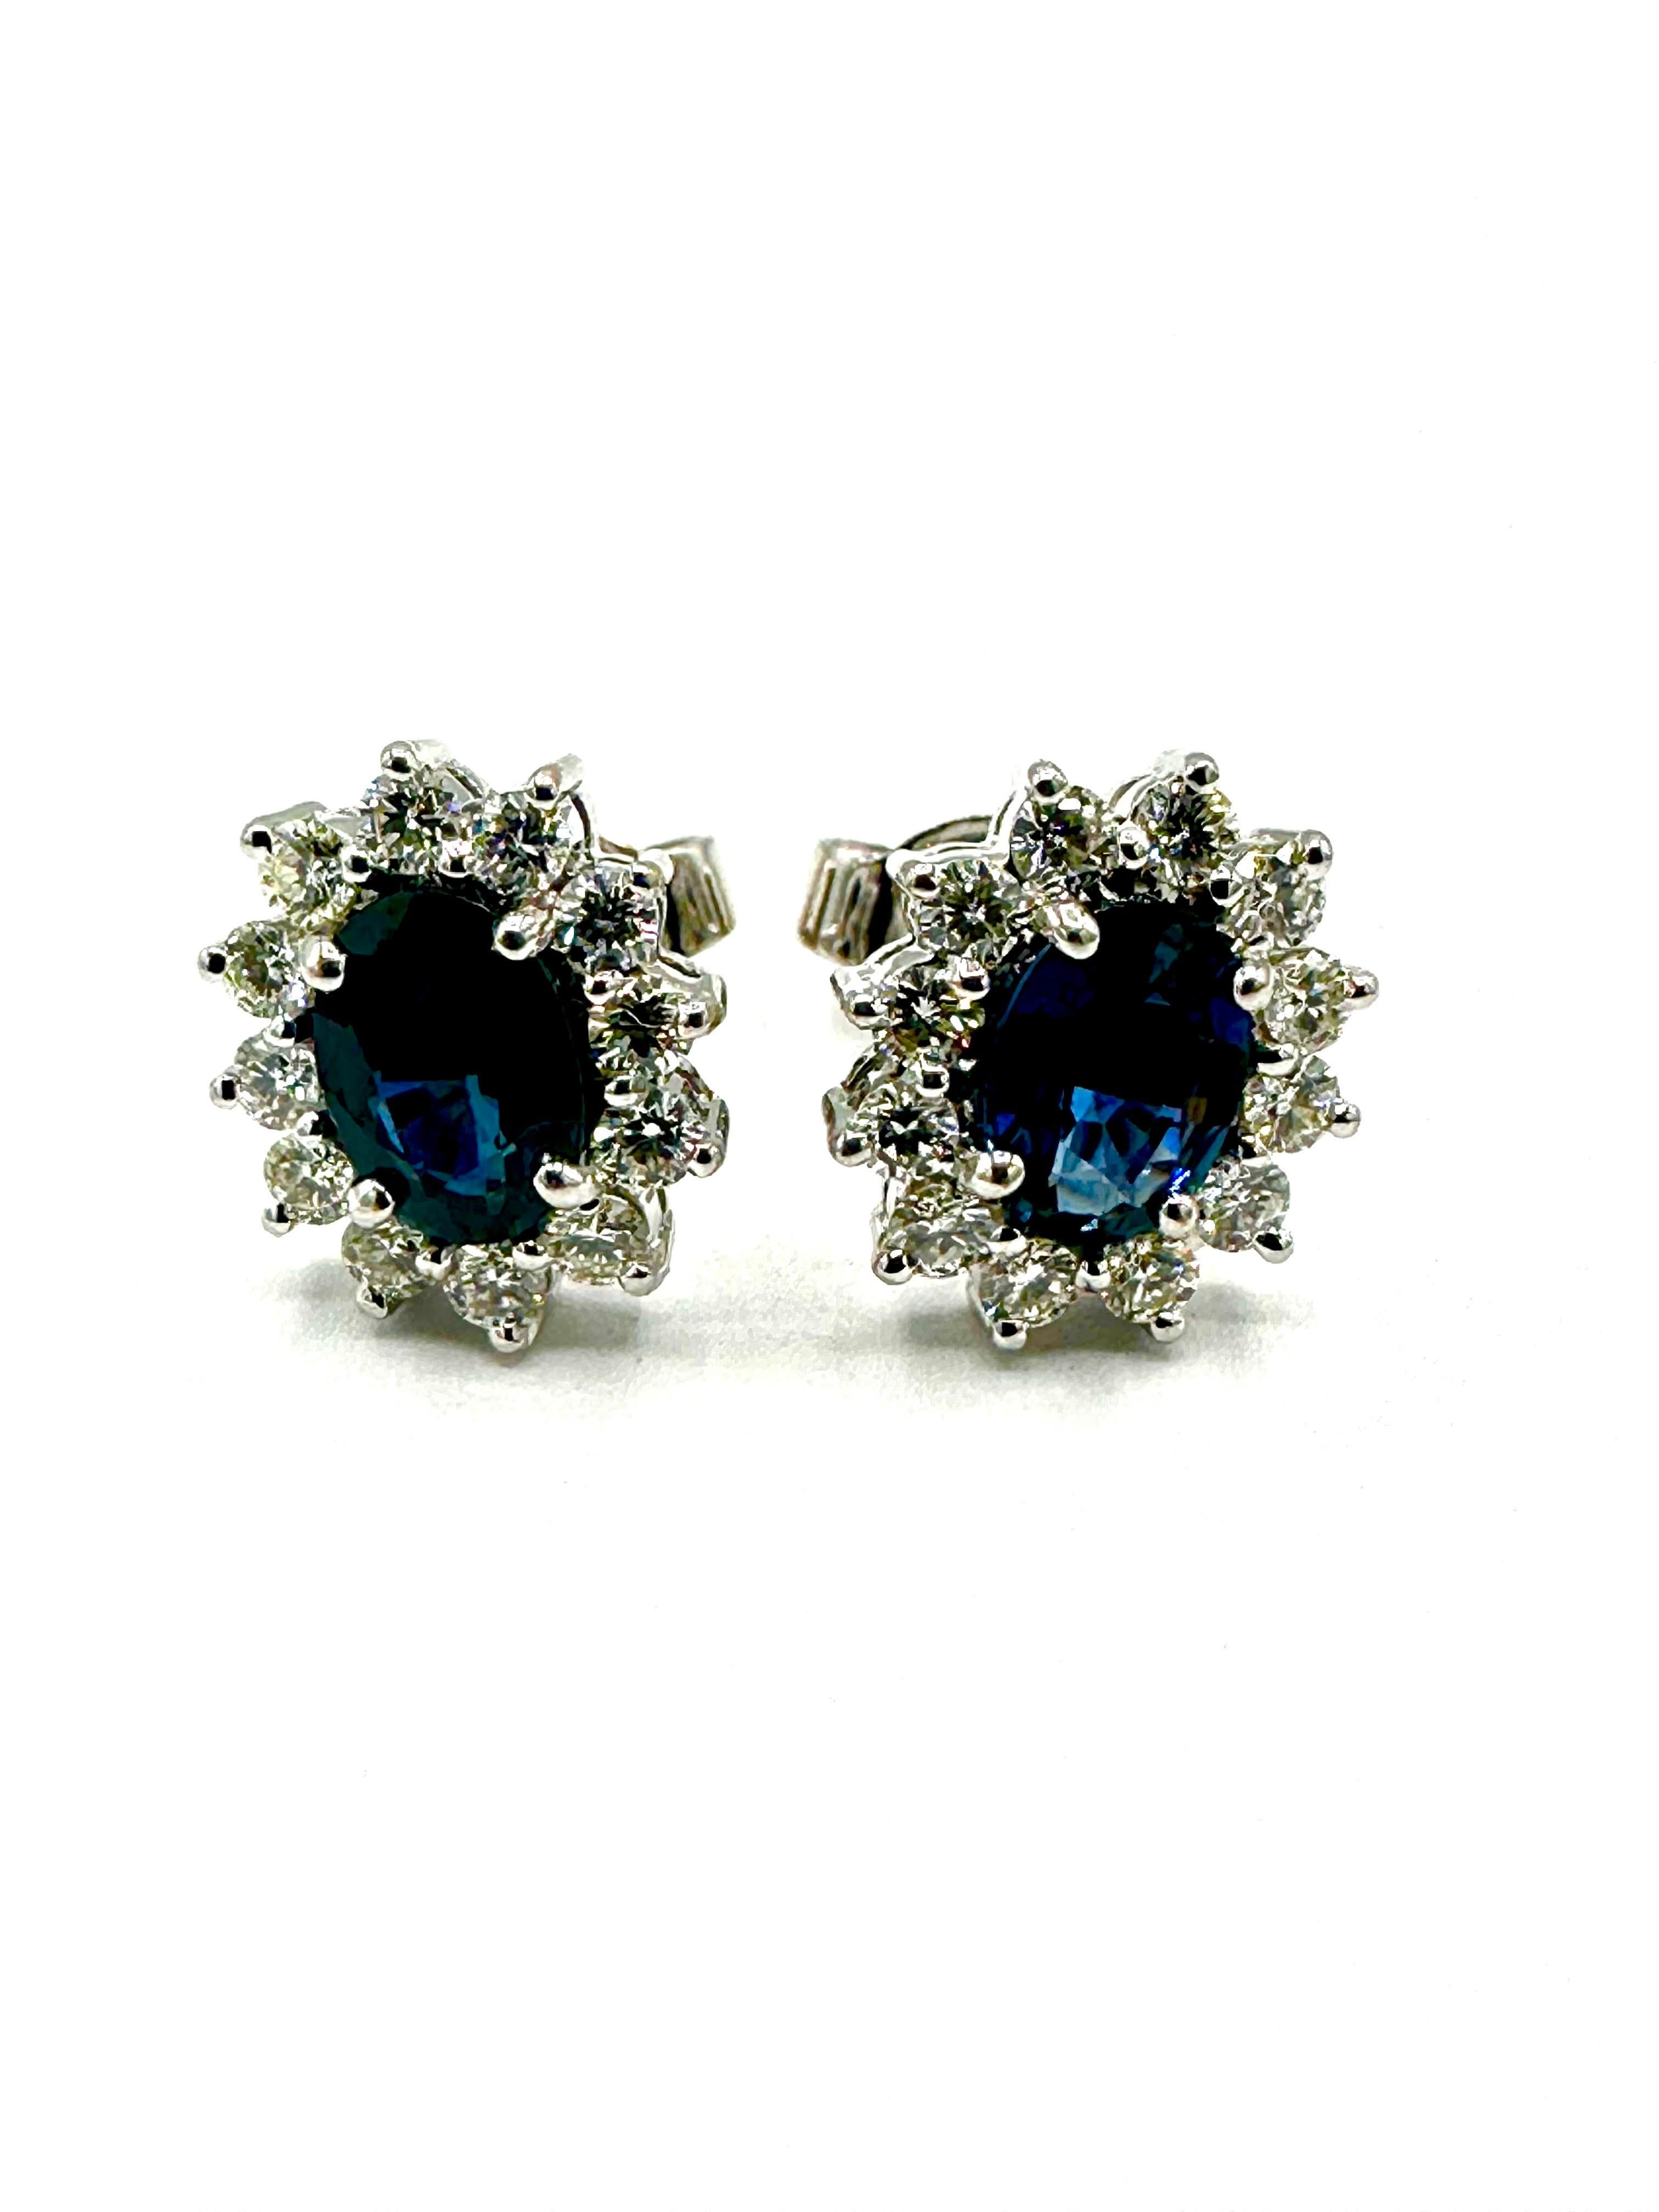 Simple and straight forward stud earrings!  These oval Sapphires are set in four prongs, surrounded by a single row of round brilliant Diamonds in 18K white gold, with a simple post back.  The two Sapphires have a total weight of 1.26 carats, and